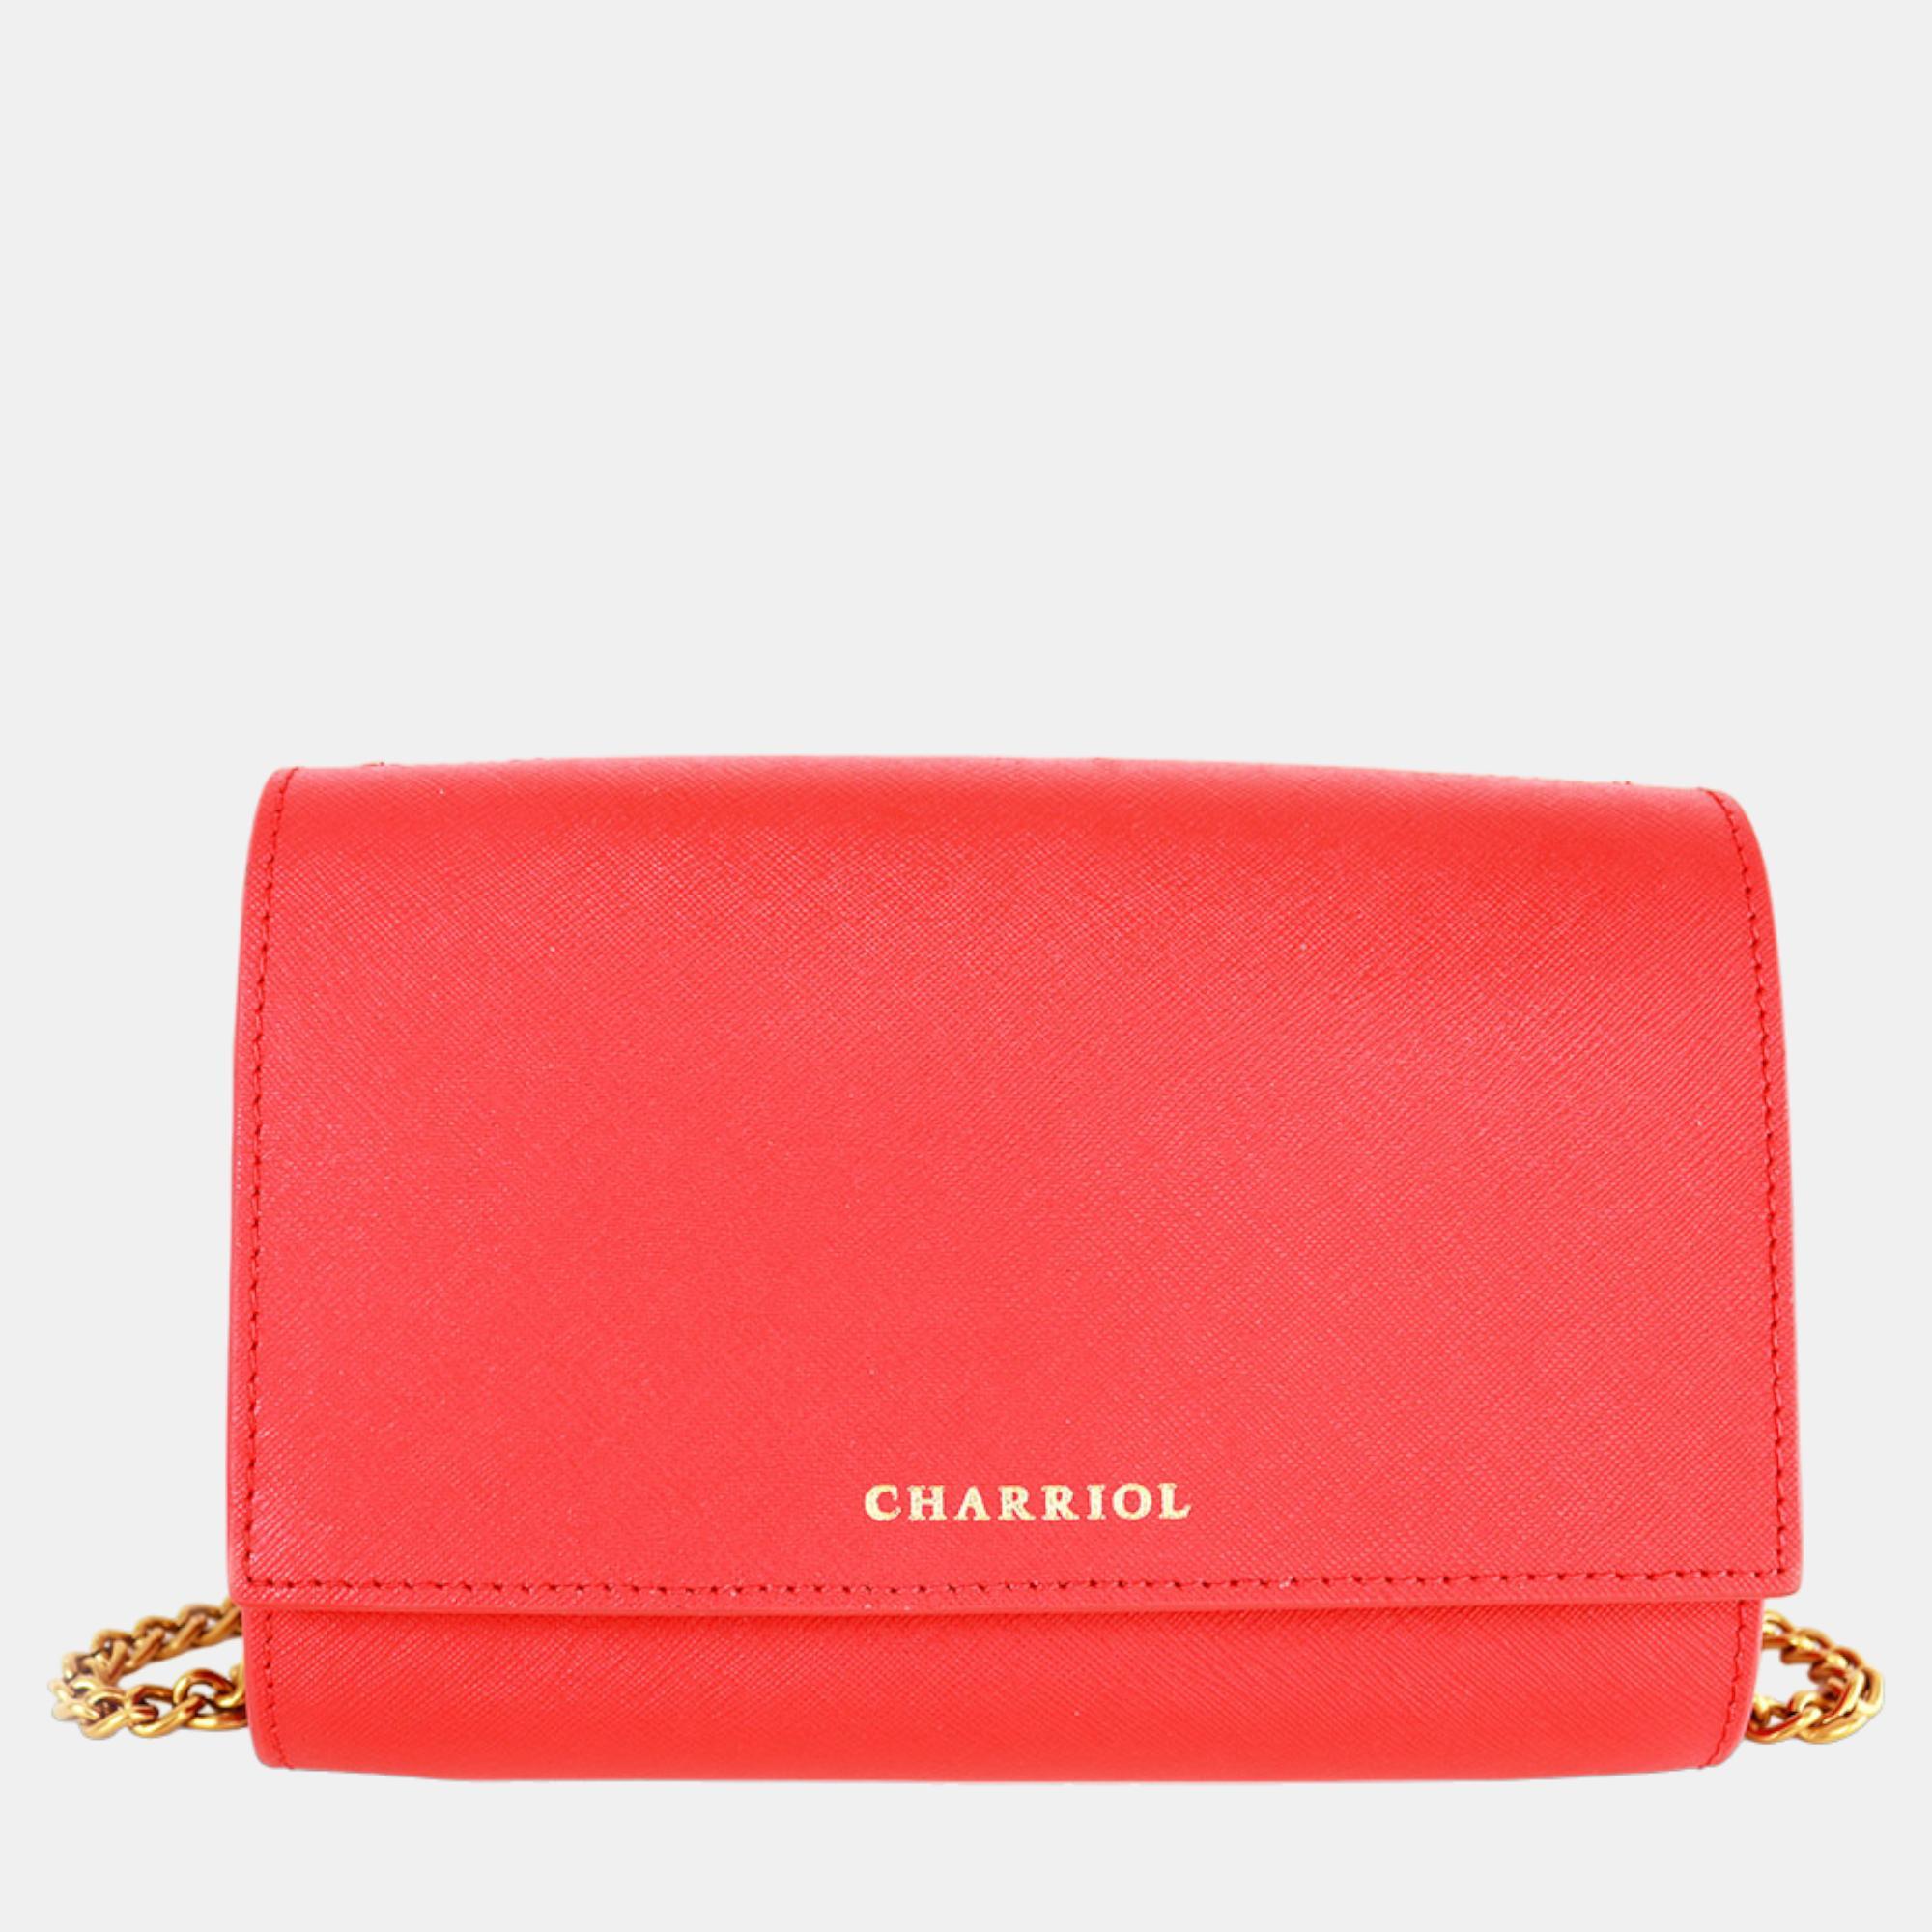 Pre-owned Charriol Red Leather Chameleon Crossbody